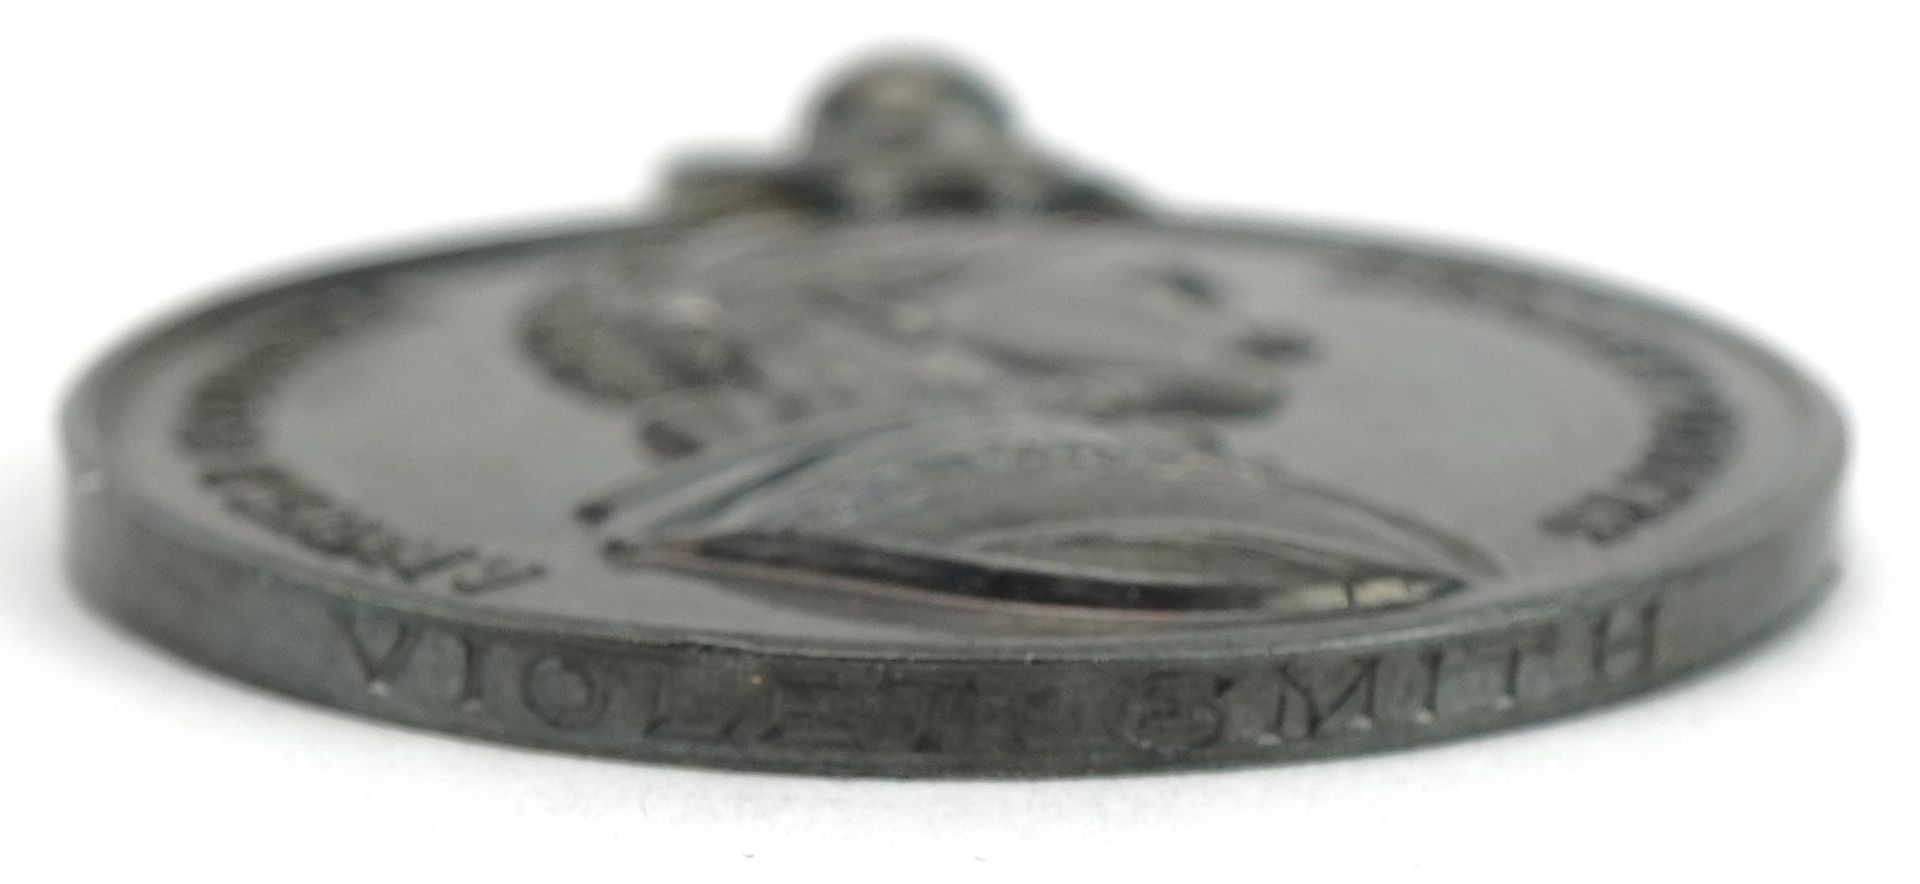 Silver Burdett Coutts & Townshend School Conduct Industry Attendance jewel with fitted case, 4cm - Image 3 of 4